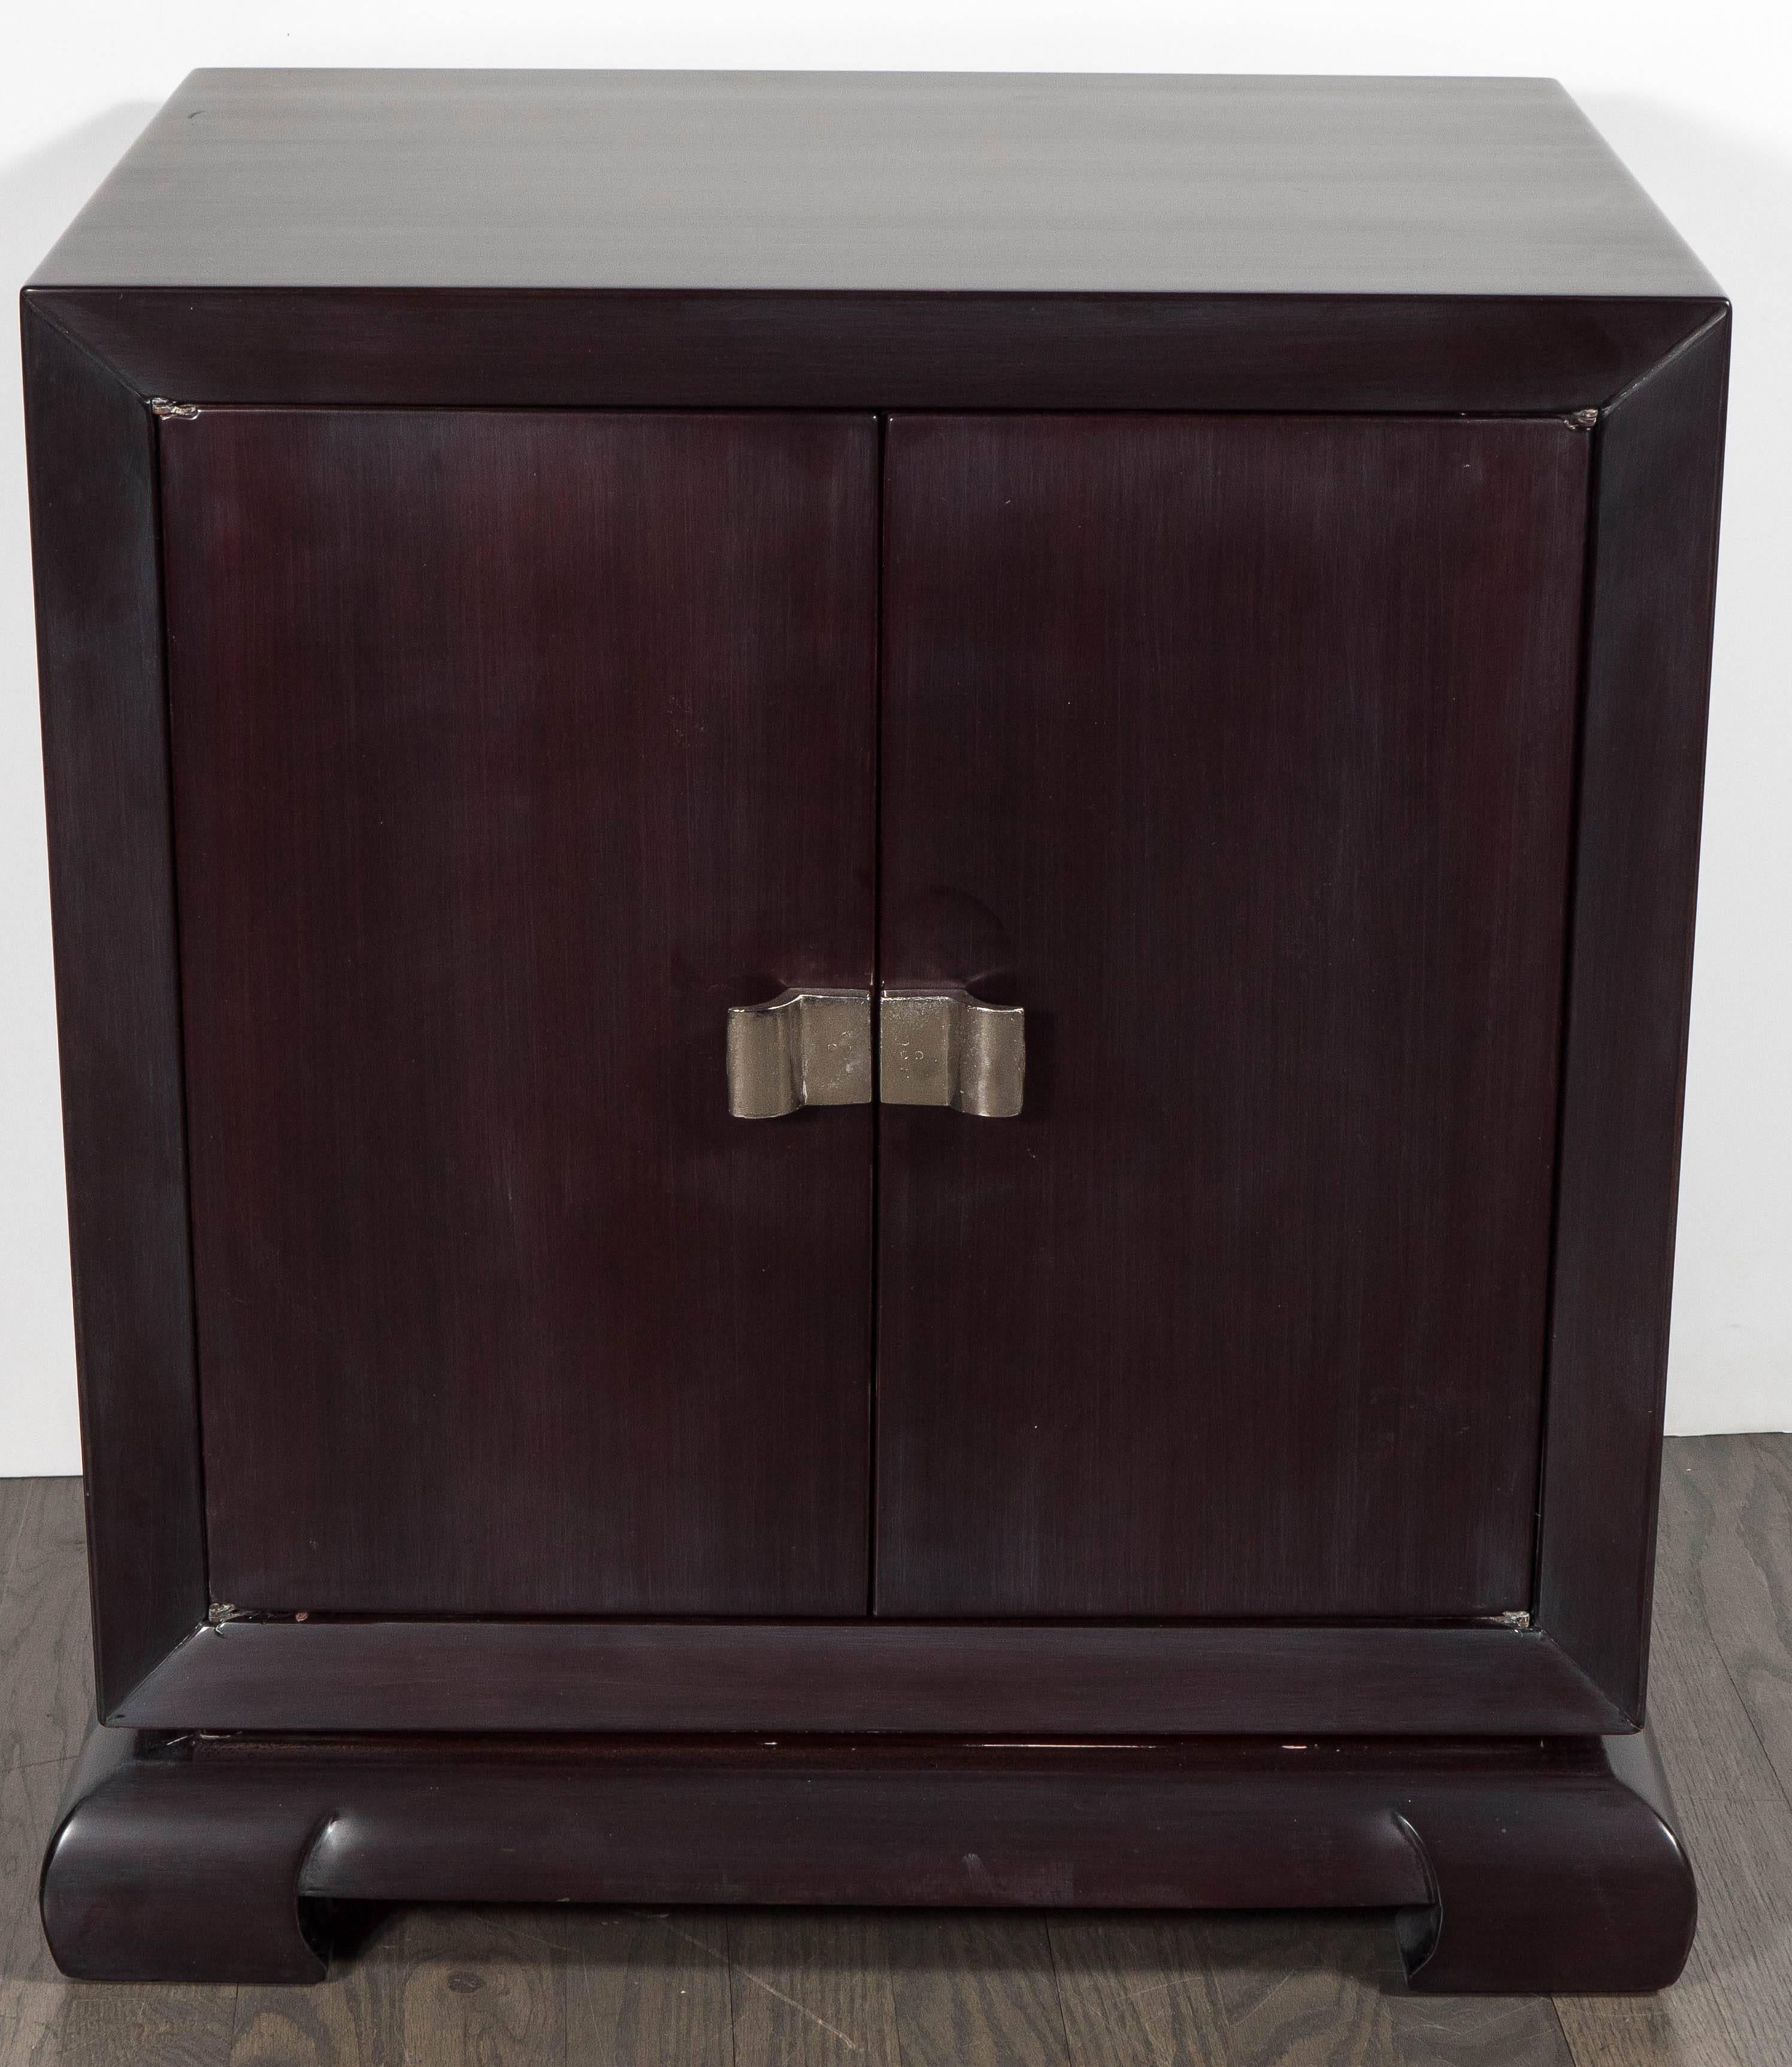 This outstanding pair of Mid-Century Modernist nightstands or end tables in the manner of James Mont in hand rubbed rich brown mahogany feature a pair of center opening doors with horizontal stylized bowed design nickel pulls and stylized scroll